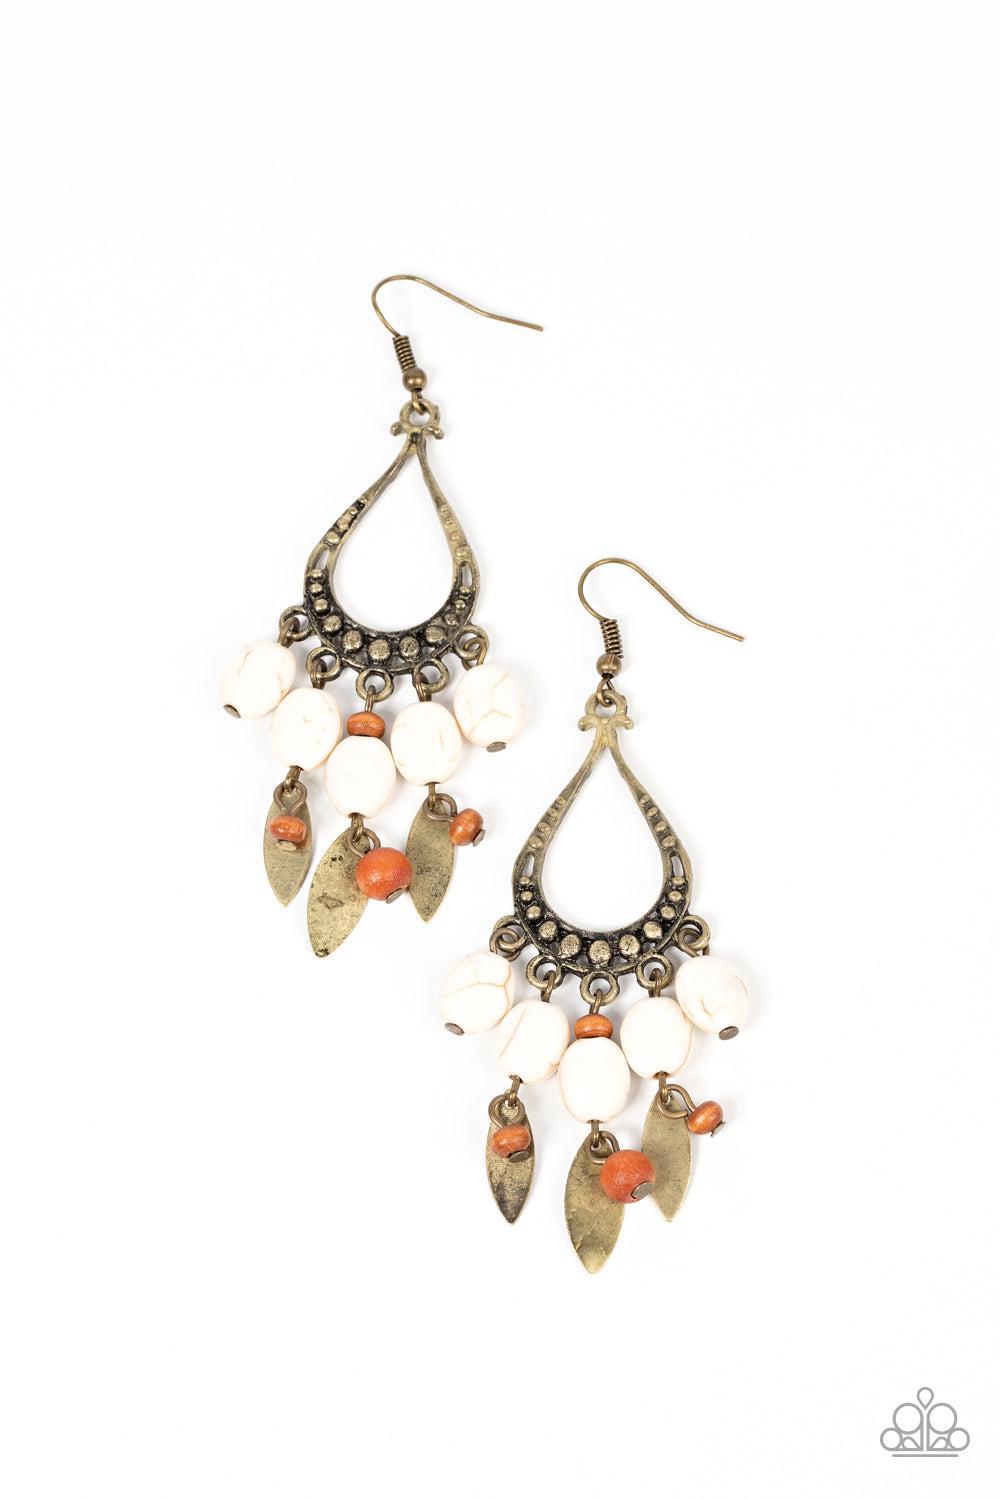 Adobe Air Brass &amp; White Stone Earrings - Paparazzi Accessories- lightbox - CarasShop.com - $5 Jewelry by Cara Jewels